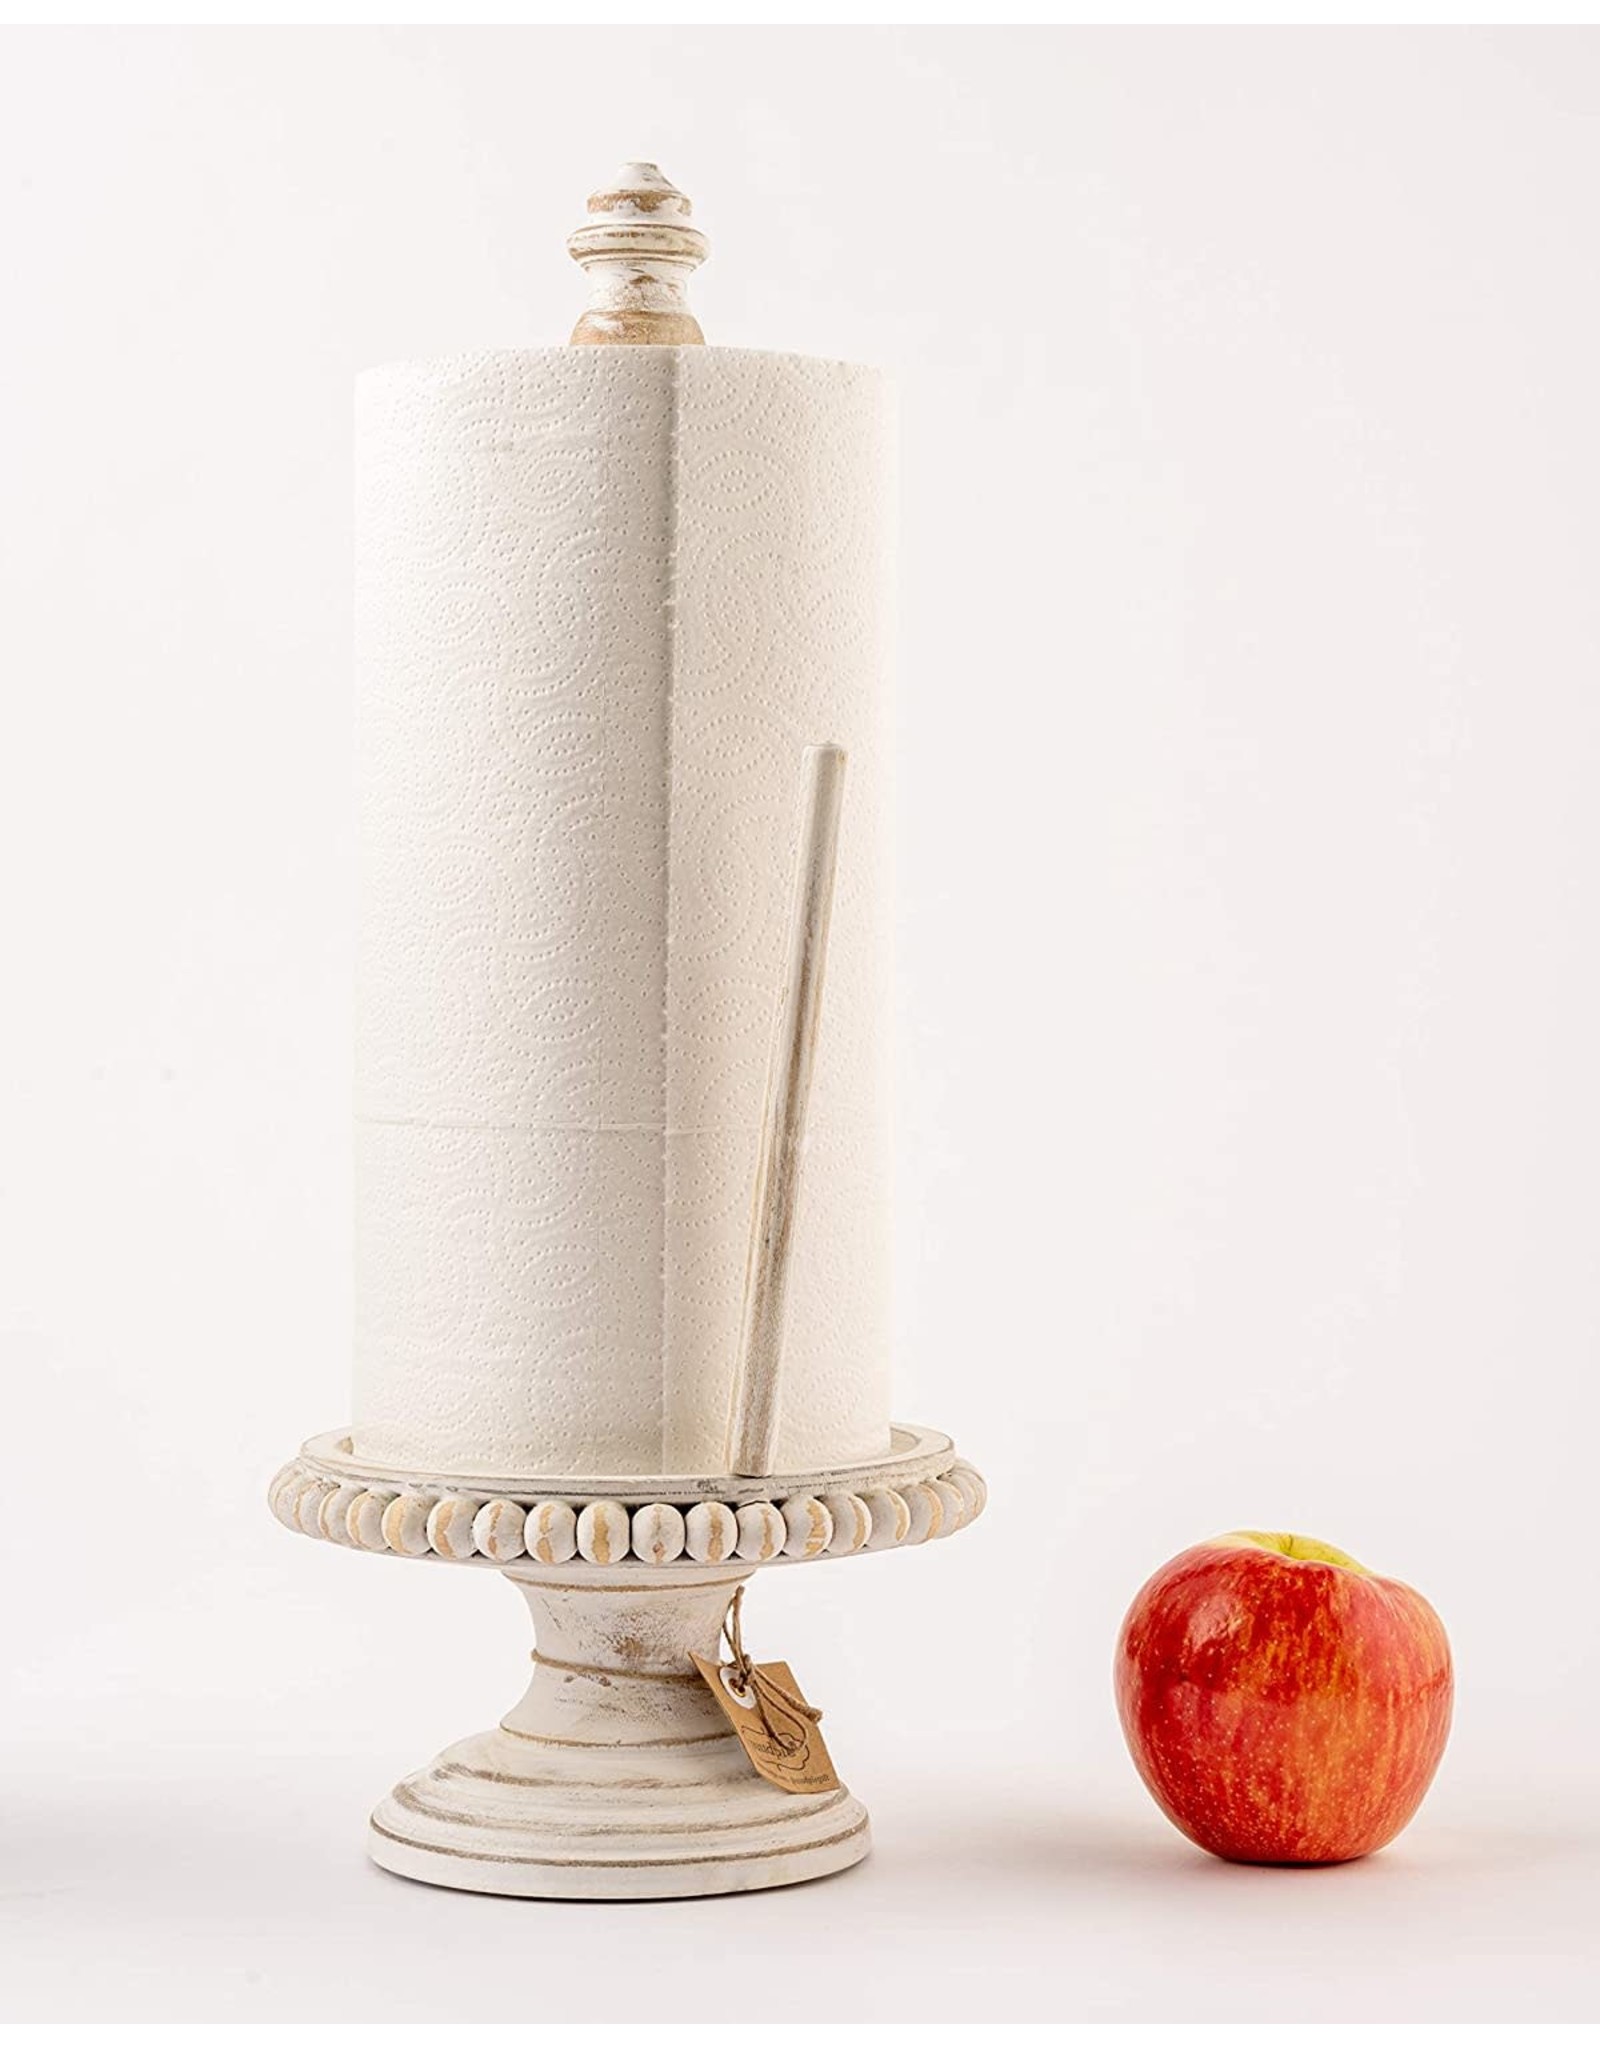 Mud Pie White Washed Beaded Paper Towel Holder